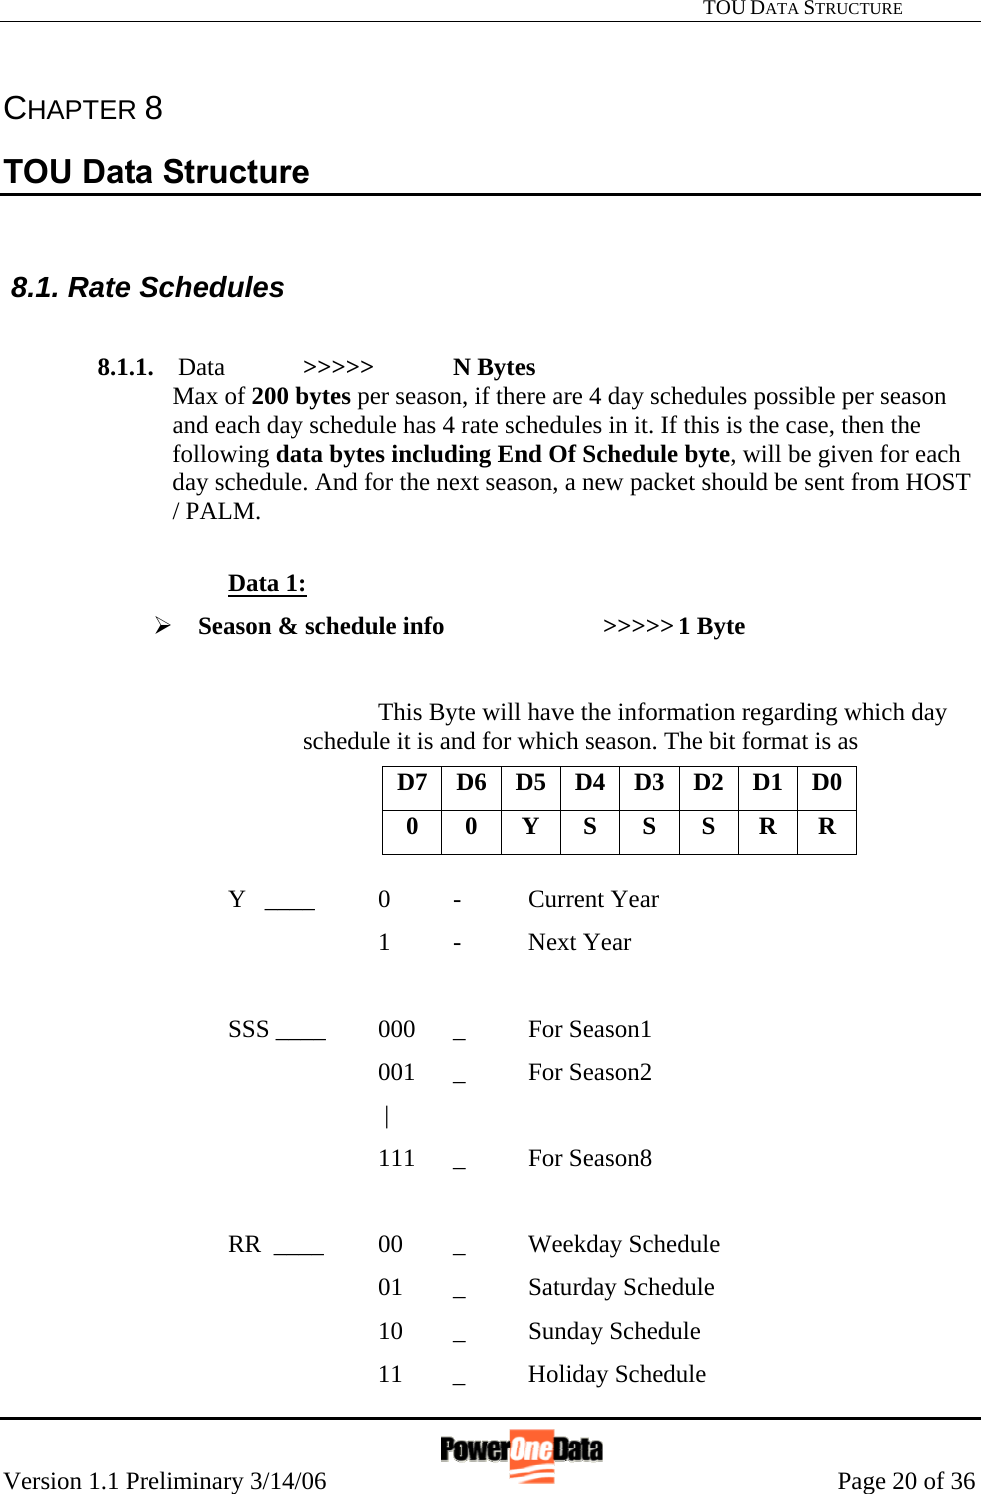   TOU DATA STRUCTURE Version 1.1 Preliminary 3/14/06                                                      Page 20 of 36 CHAPTER 8 TOU Data Structure   8.1. Rate Schedules   8.1.1.  Data  &gt;&gt;&gt;&gt;&gt;  N Bytes Max of 200 bytes per season, if there are 4 day schedules possible per season and each day schedule has 4 rate schedules in it. If this is the case, then the following data bytes including End Of Schedule byte, will be given for each day schedule. And for the next season, a new packet should be sent from HOST / PALM.  Data 1: ¾ Season &amp; schedule info     &gt;&gt;&gt;&gt;&gt; 1 Byte  This Byte will have the information regarding which day schedule it is and for which season. The bit format is as               Y   ____  0  -  Current Year      1 - Next Year     SSS ____  000 _ For Season1      001 _ For Season2        |      111 _ For Season8    RR  ____  00  _  Weekday Schedule      01 _  Saturday Schedule      10 _ Sunday Schedule      11 _ Holiday Schedule D7 D6 D5 D4 D3 D2 D1 D0 0 0 Y S S S R R 